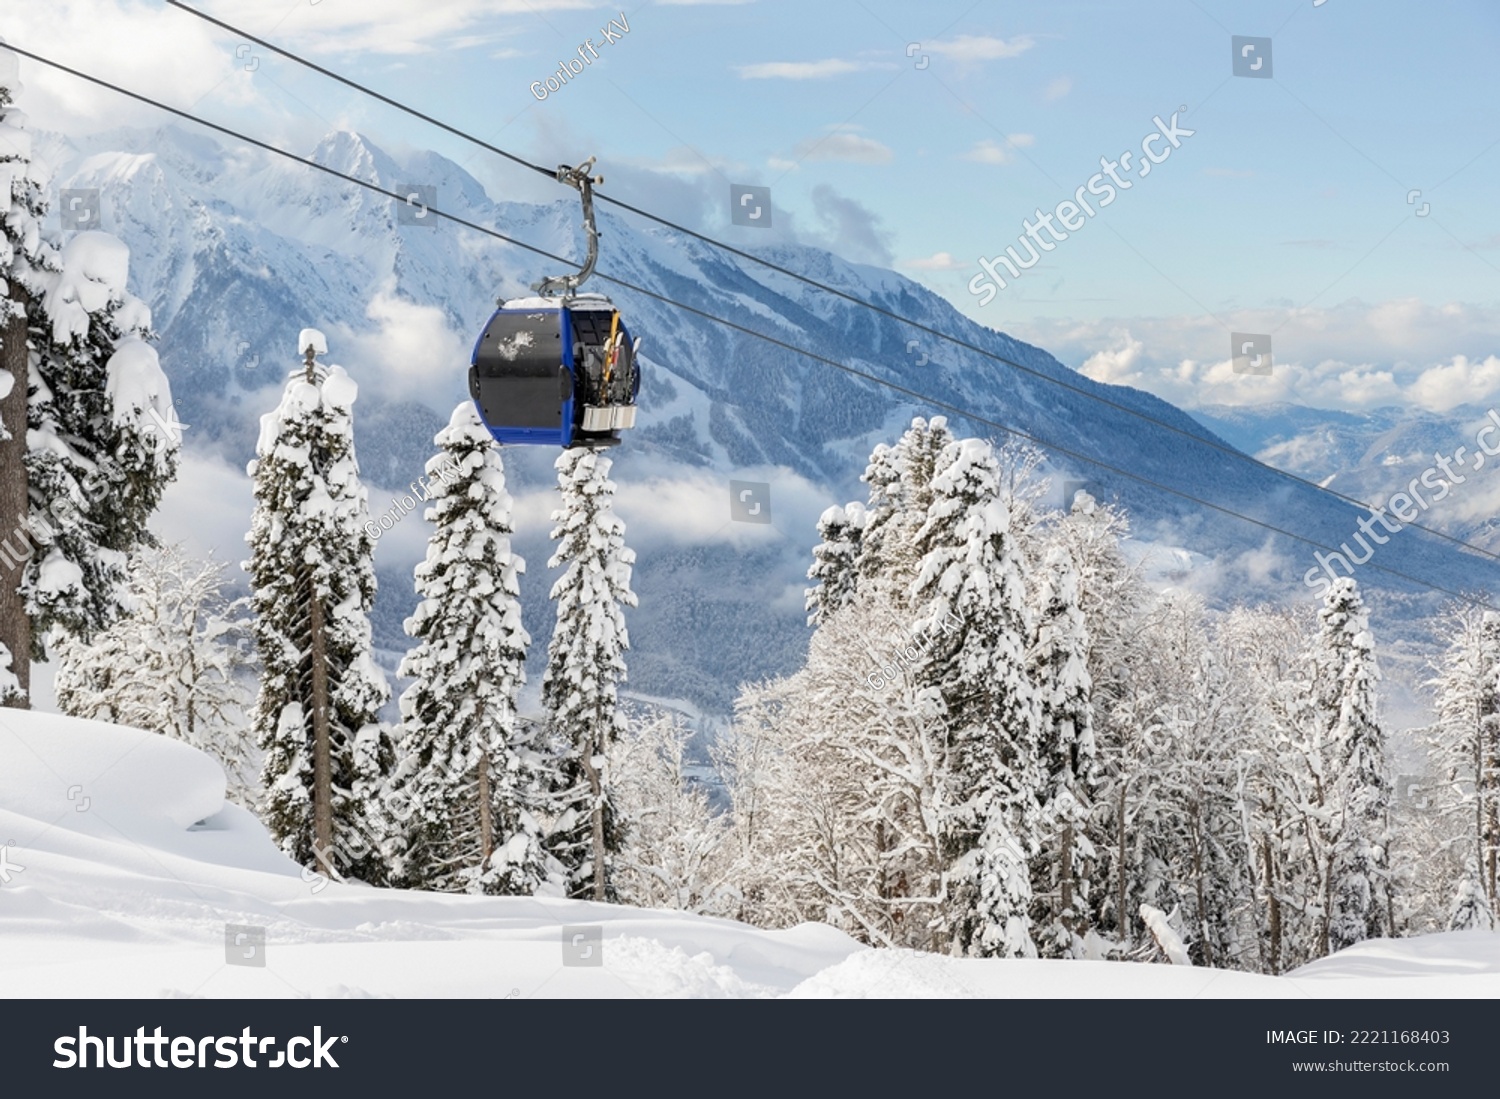 New modern spacious big cabin ski lift gondola against snowcapped forest tree and mountain peaks covered in snow landscape in luxury winter alpine resort. Winter leisure sports, recreation and travel #2221168403